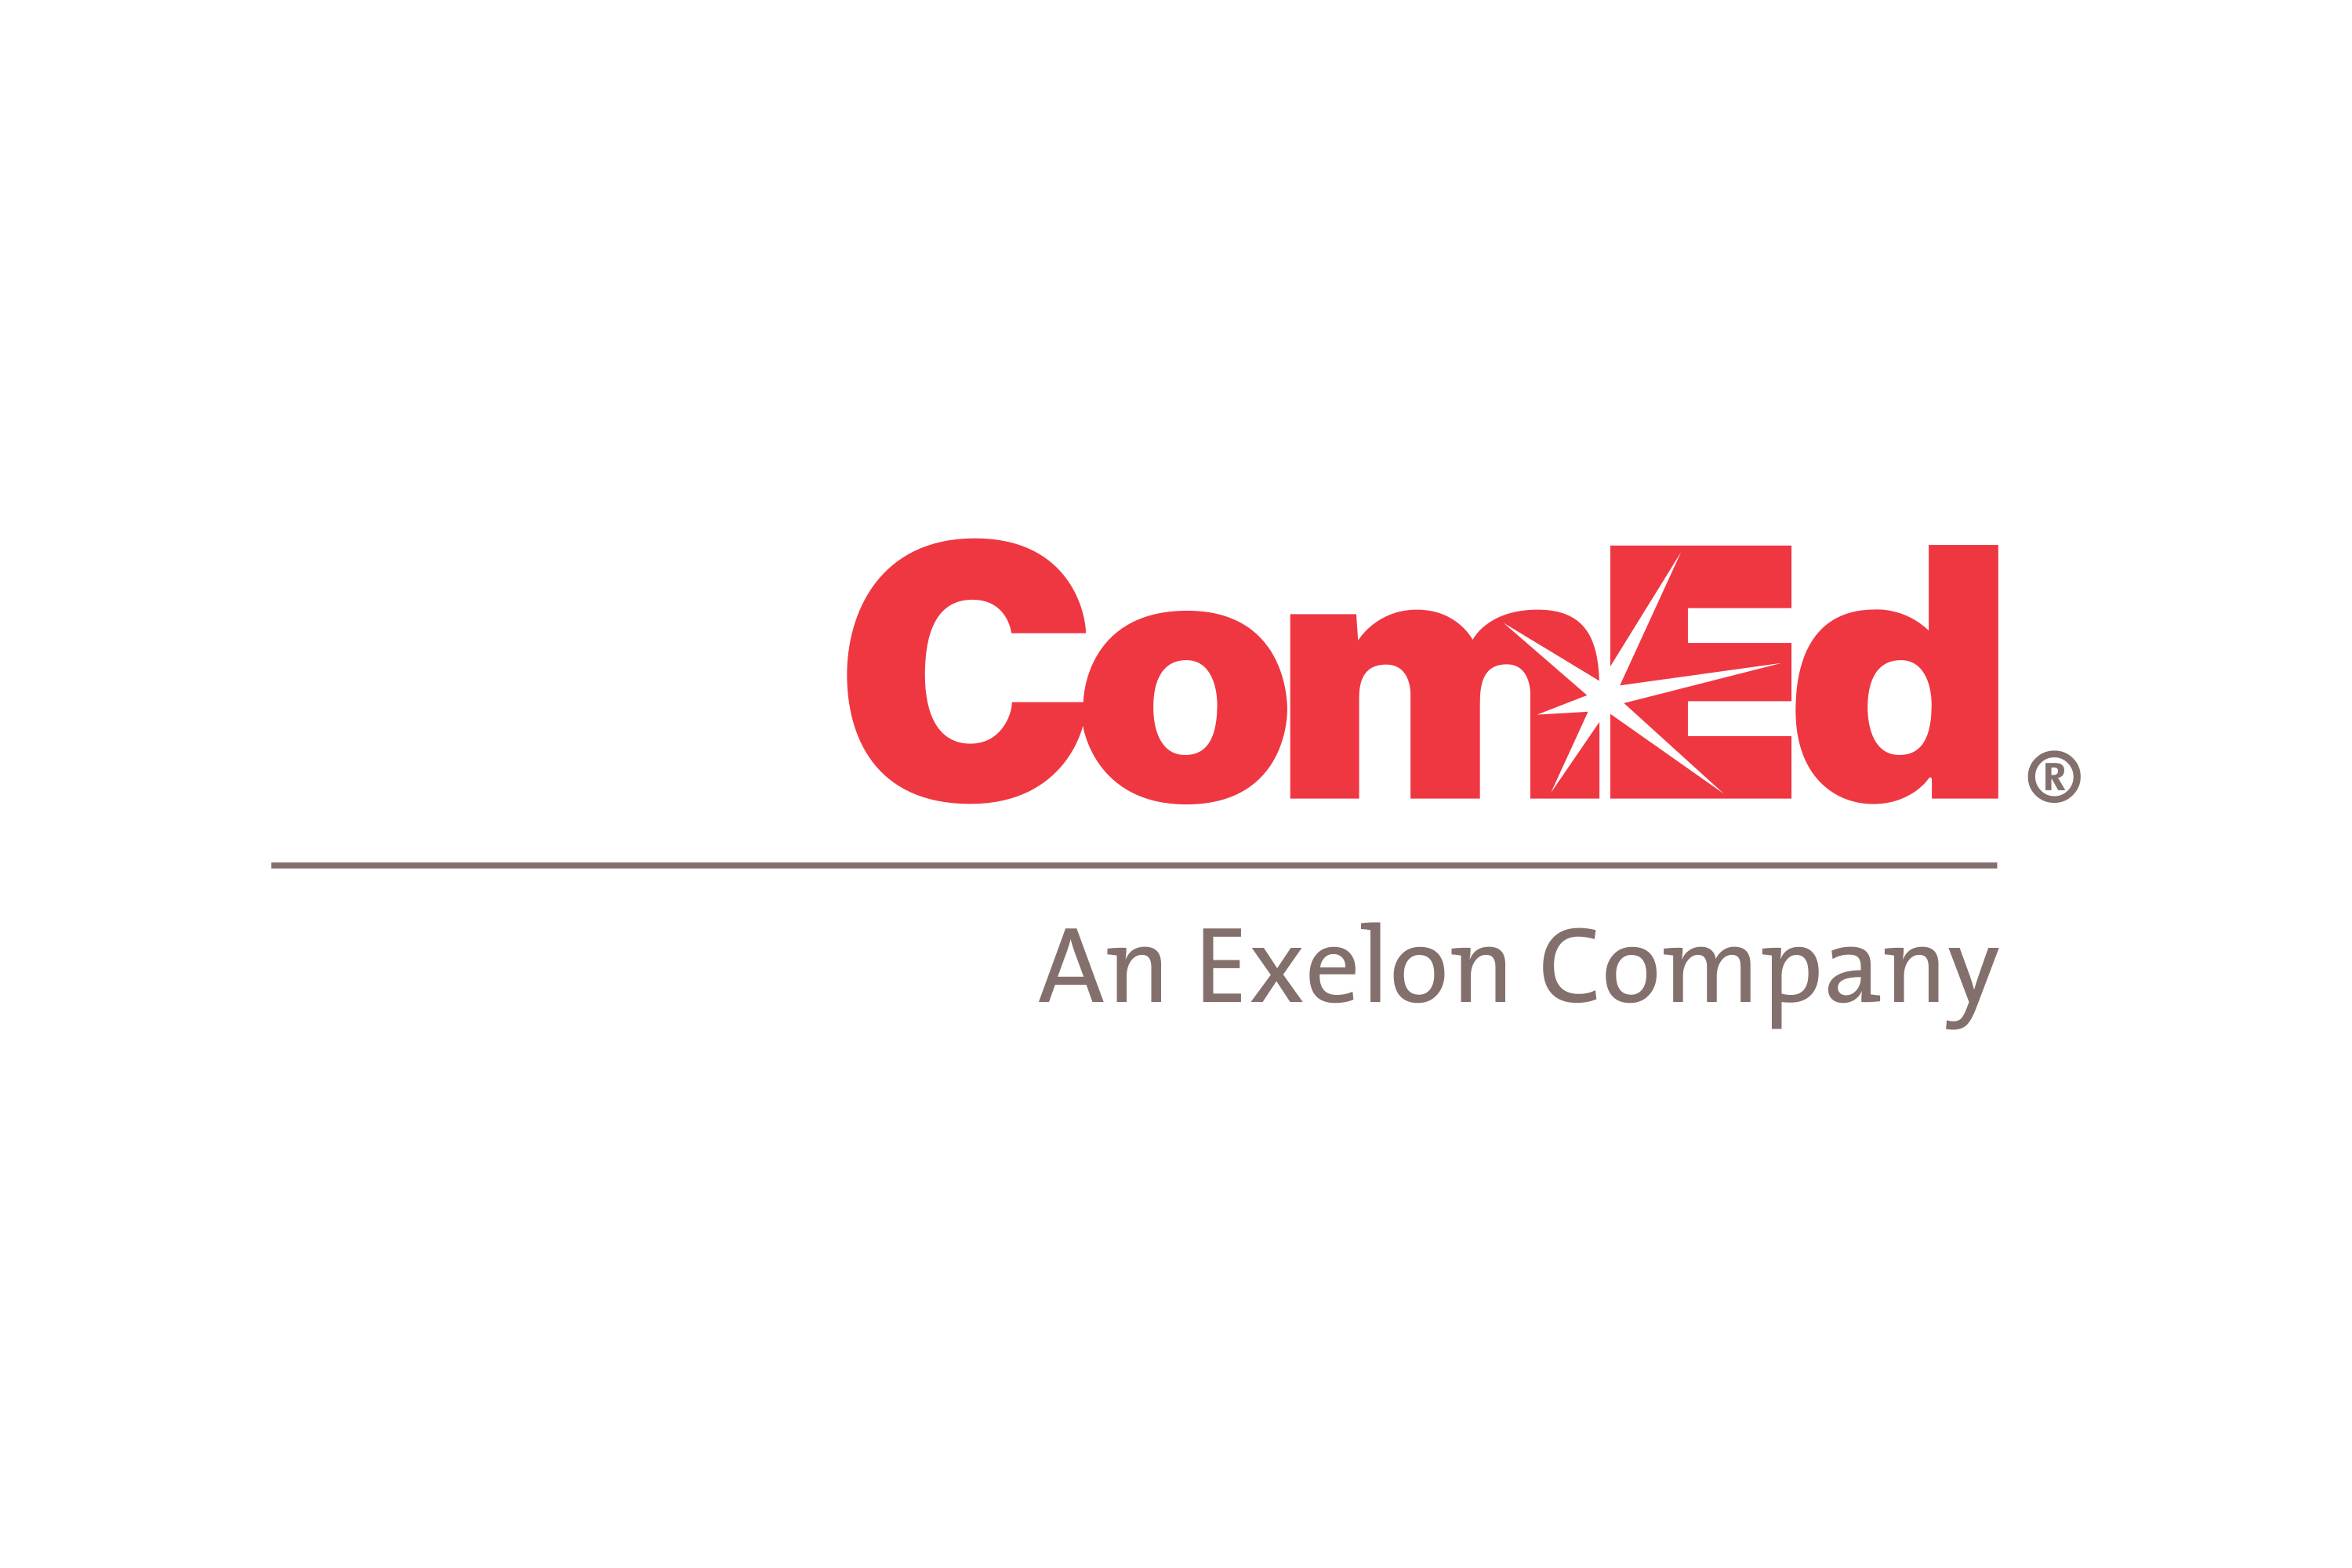 download-commonwealth-edison-logo-in-svg-vector-or-png-file-format